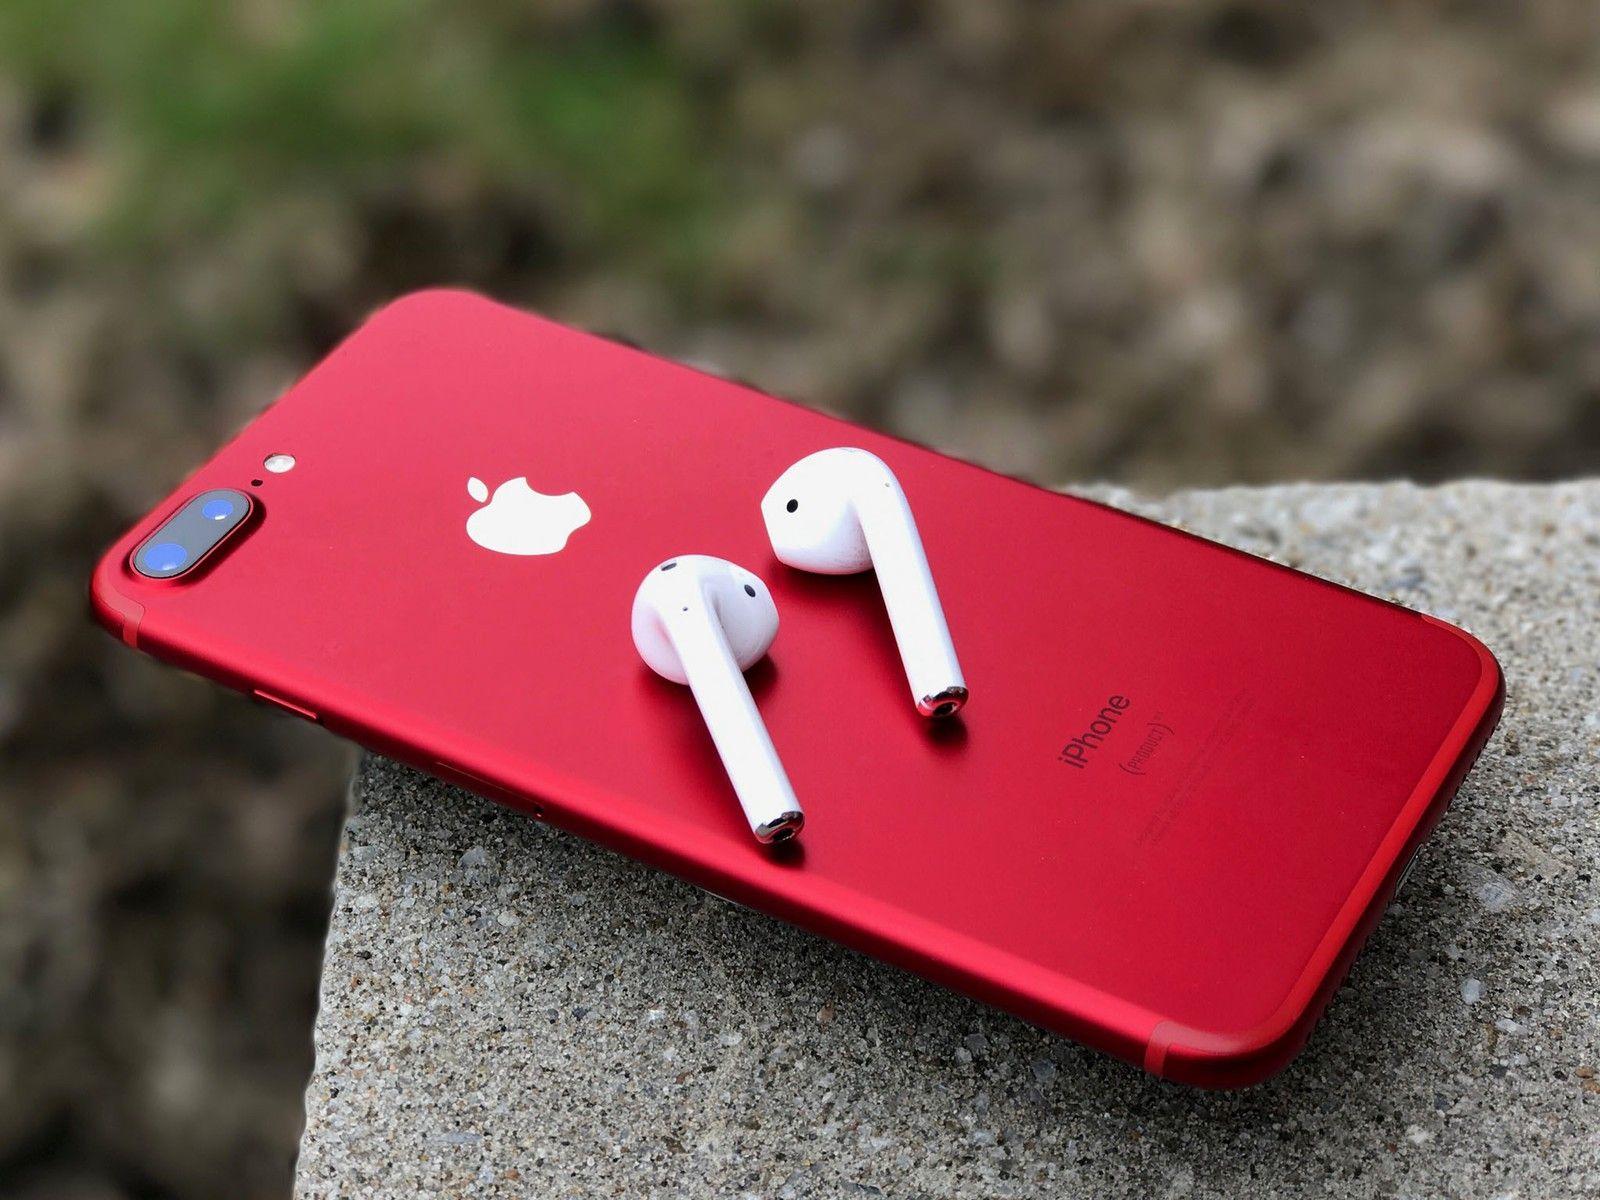 Silver On a Red Hand Logo - iPhone 8 color: Should you get silver, gold, space gray, or (Product ...